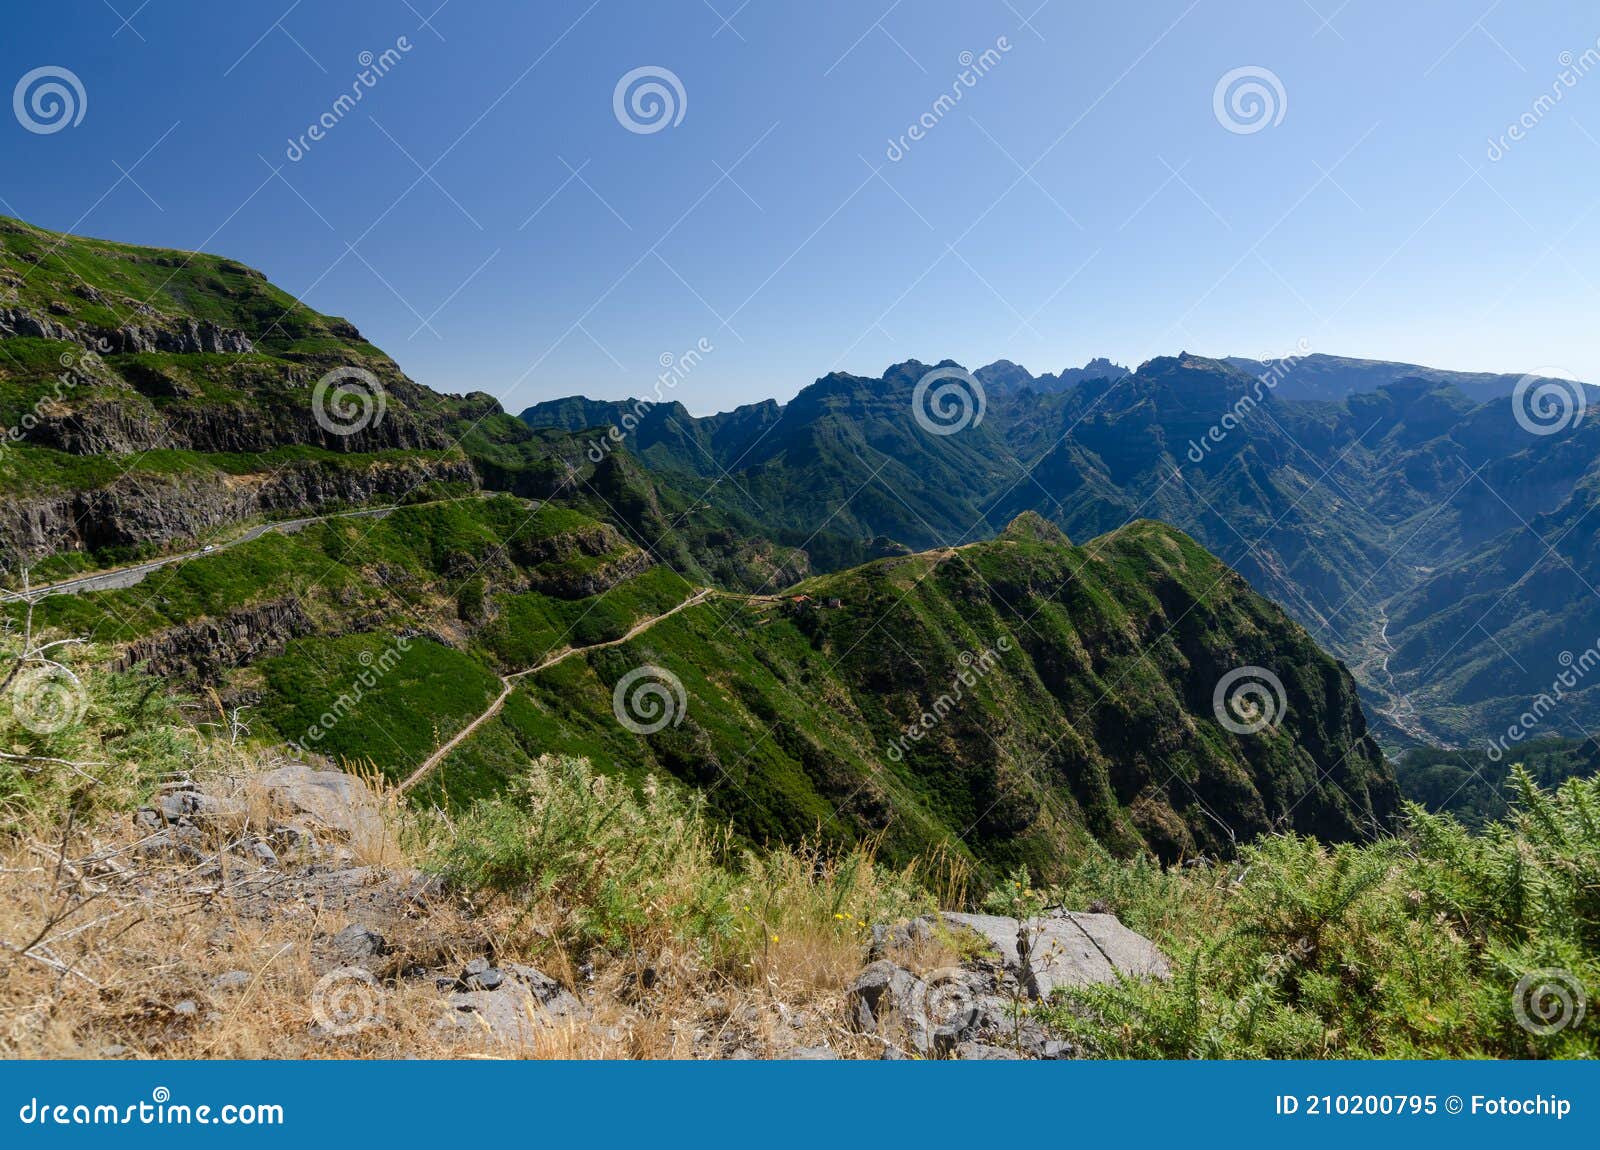 view to encumeada pass from viewpoint canto do muro, madeira, portugal.